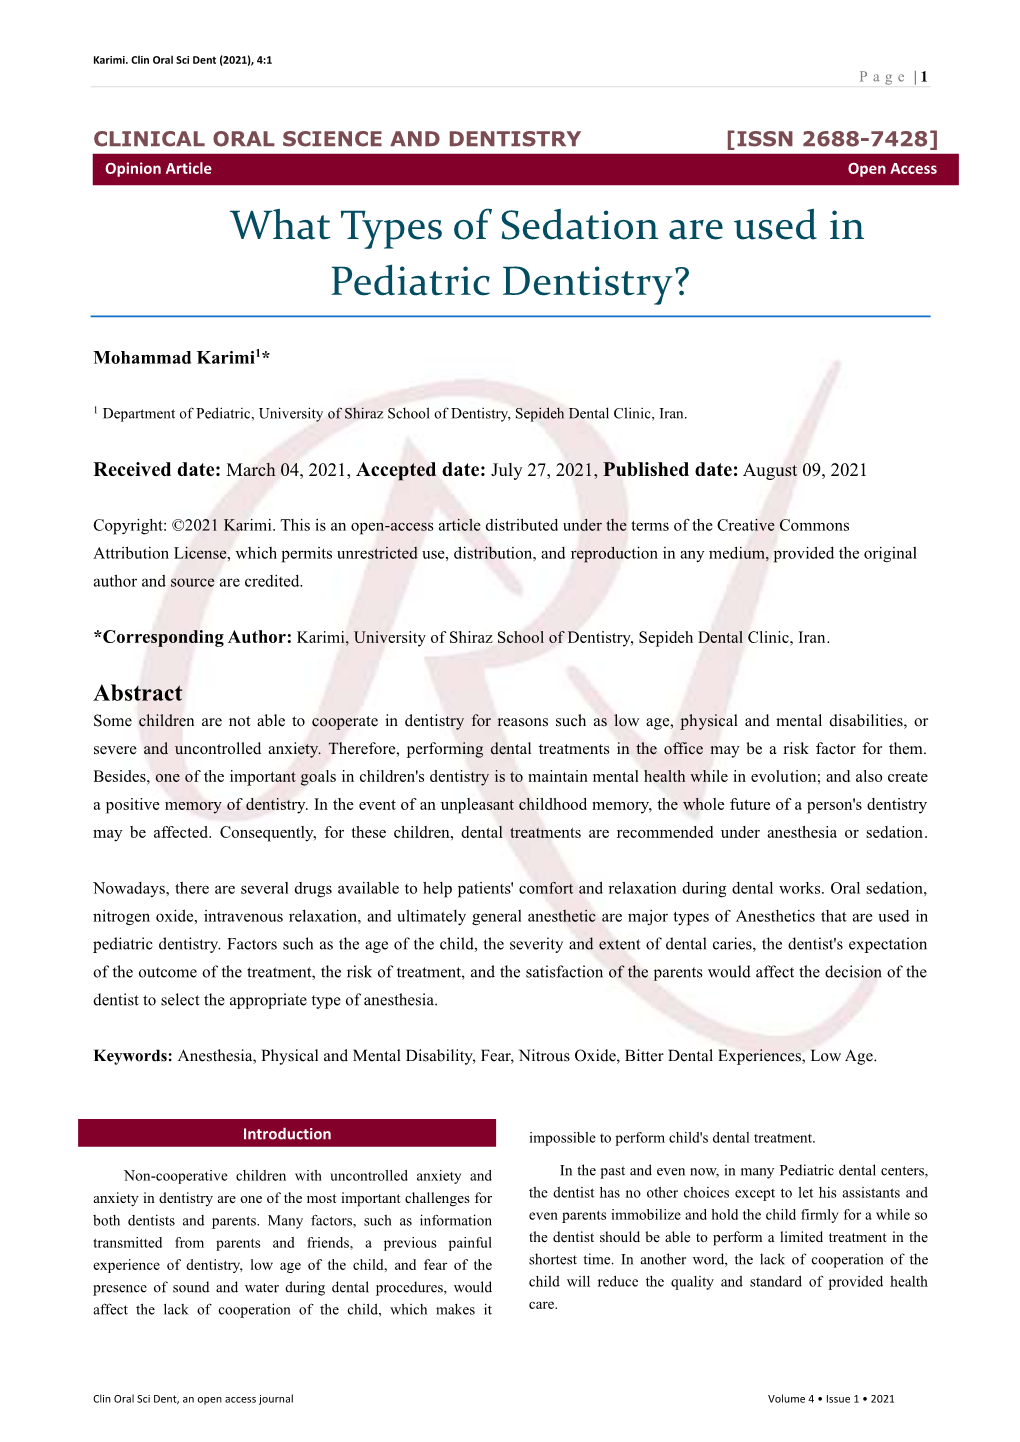 What Types of Sedation Are Used in Pediatric Dentistry?